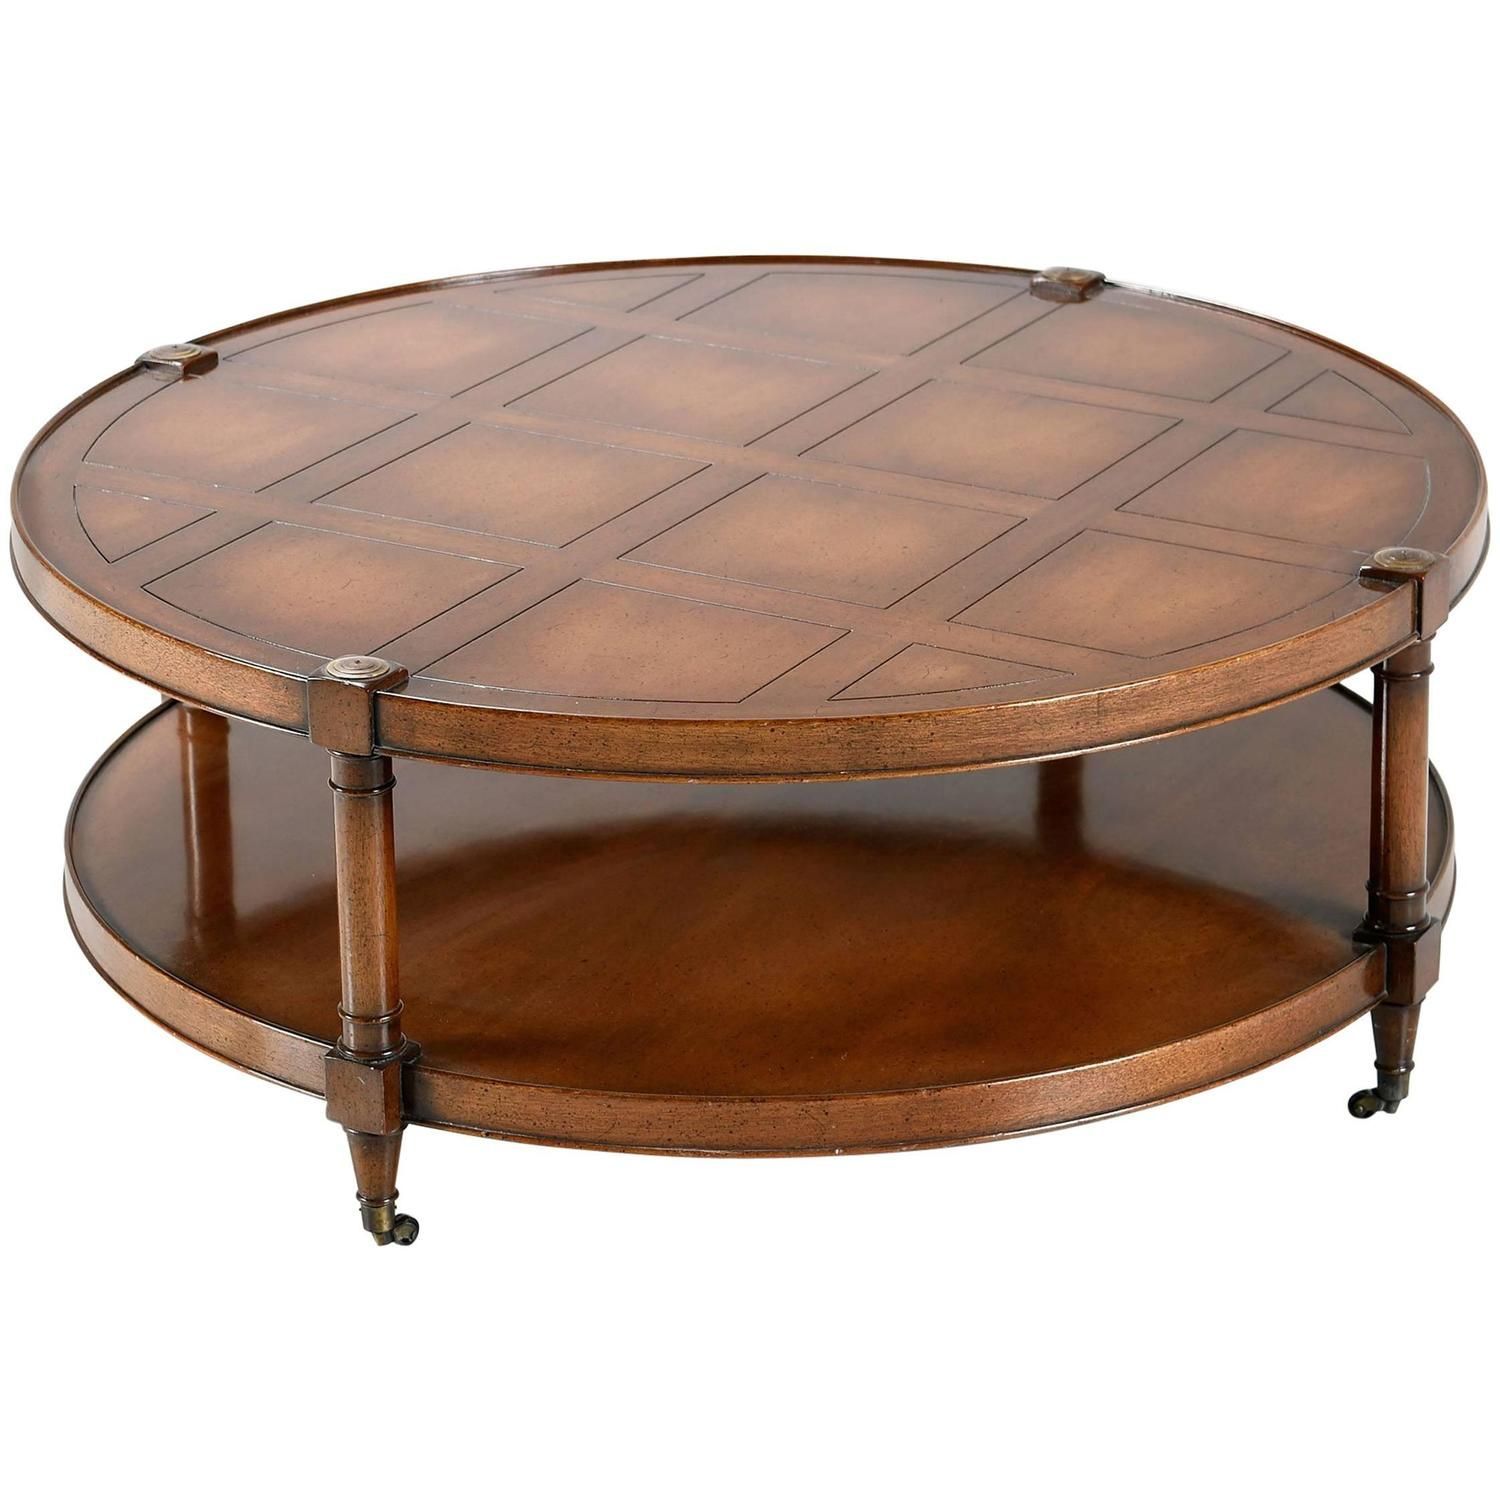 Heritage Mahogany Round Coffee Table On Casters | Coffee Table Vintage With American Heritage Round Coffee Tables (View 14 of 15)